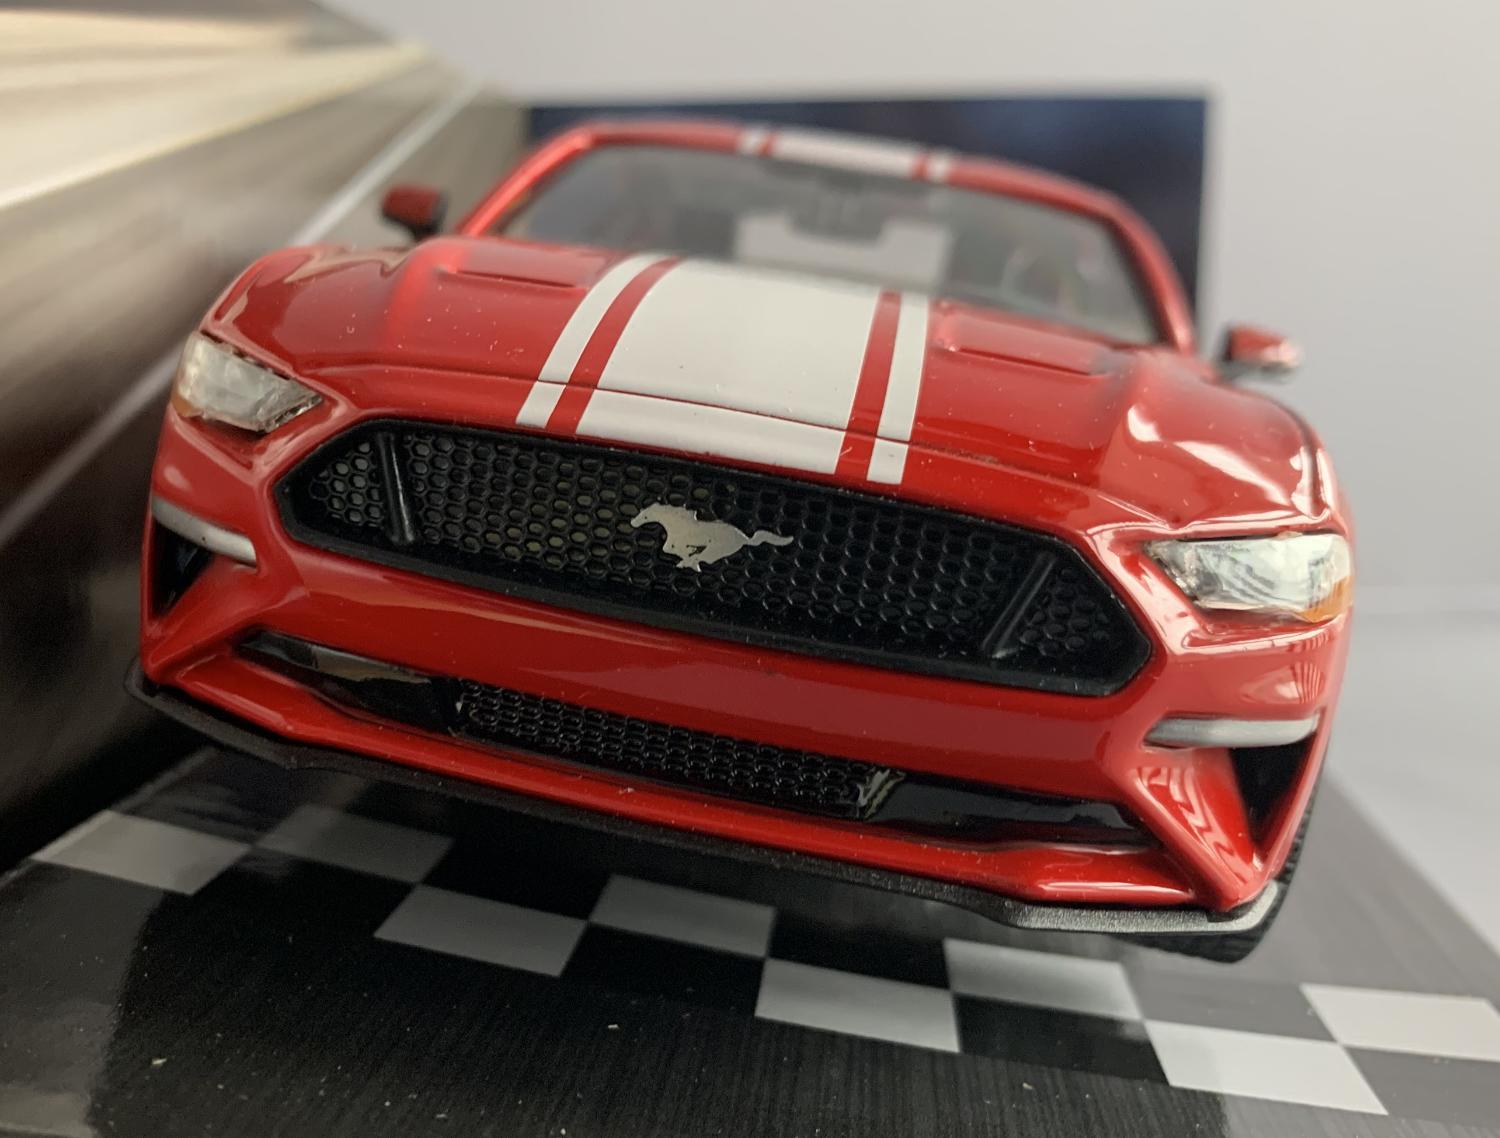 Ford Mustang 5.0 GT 2018 in red 1:24 scale model from Motormax, GT Racing